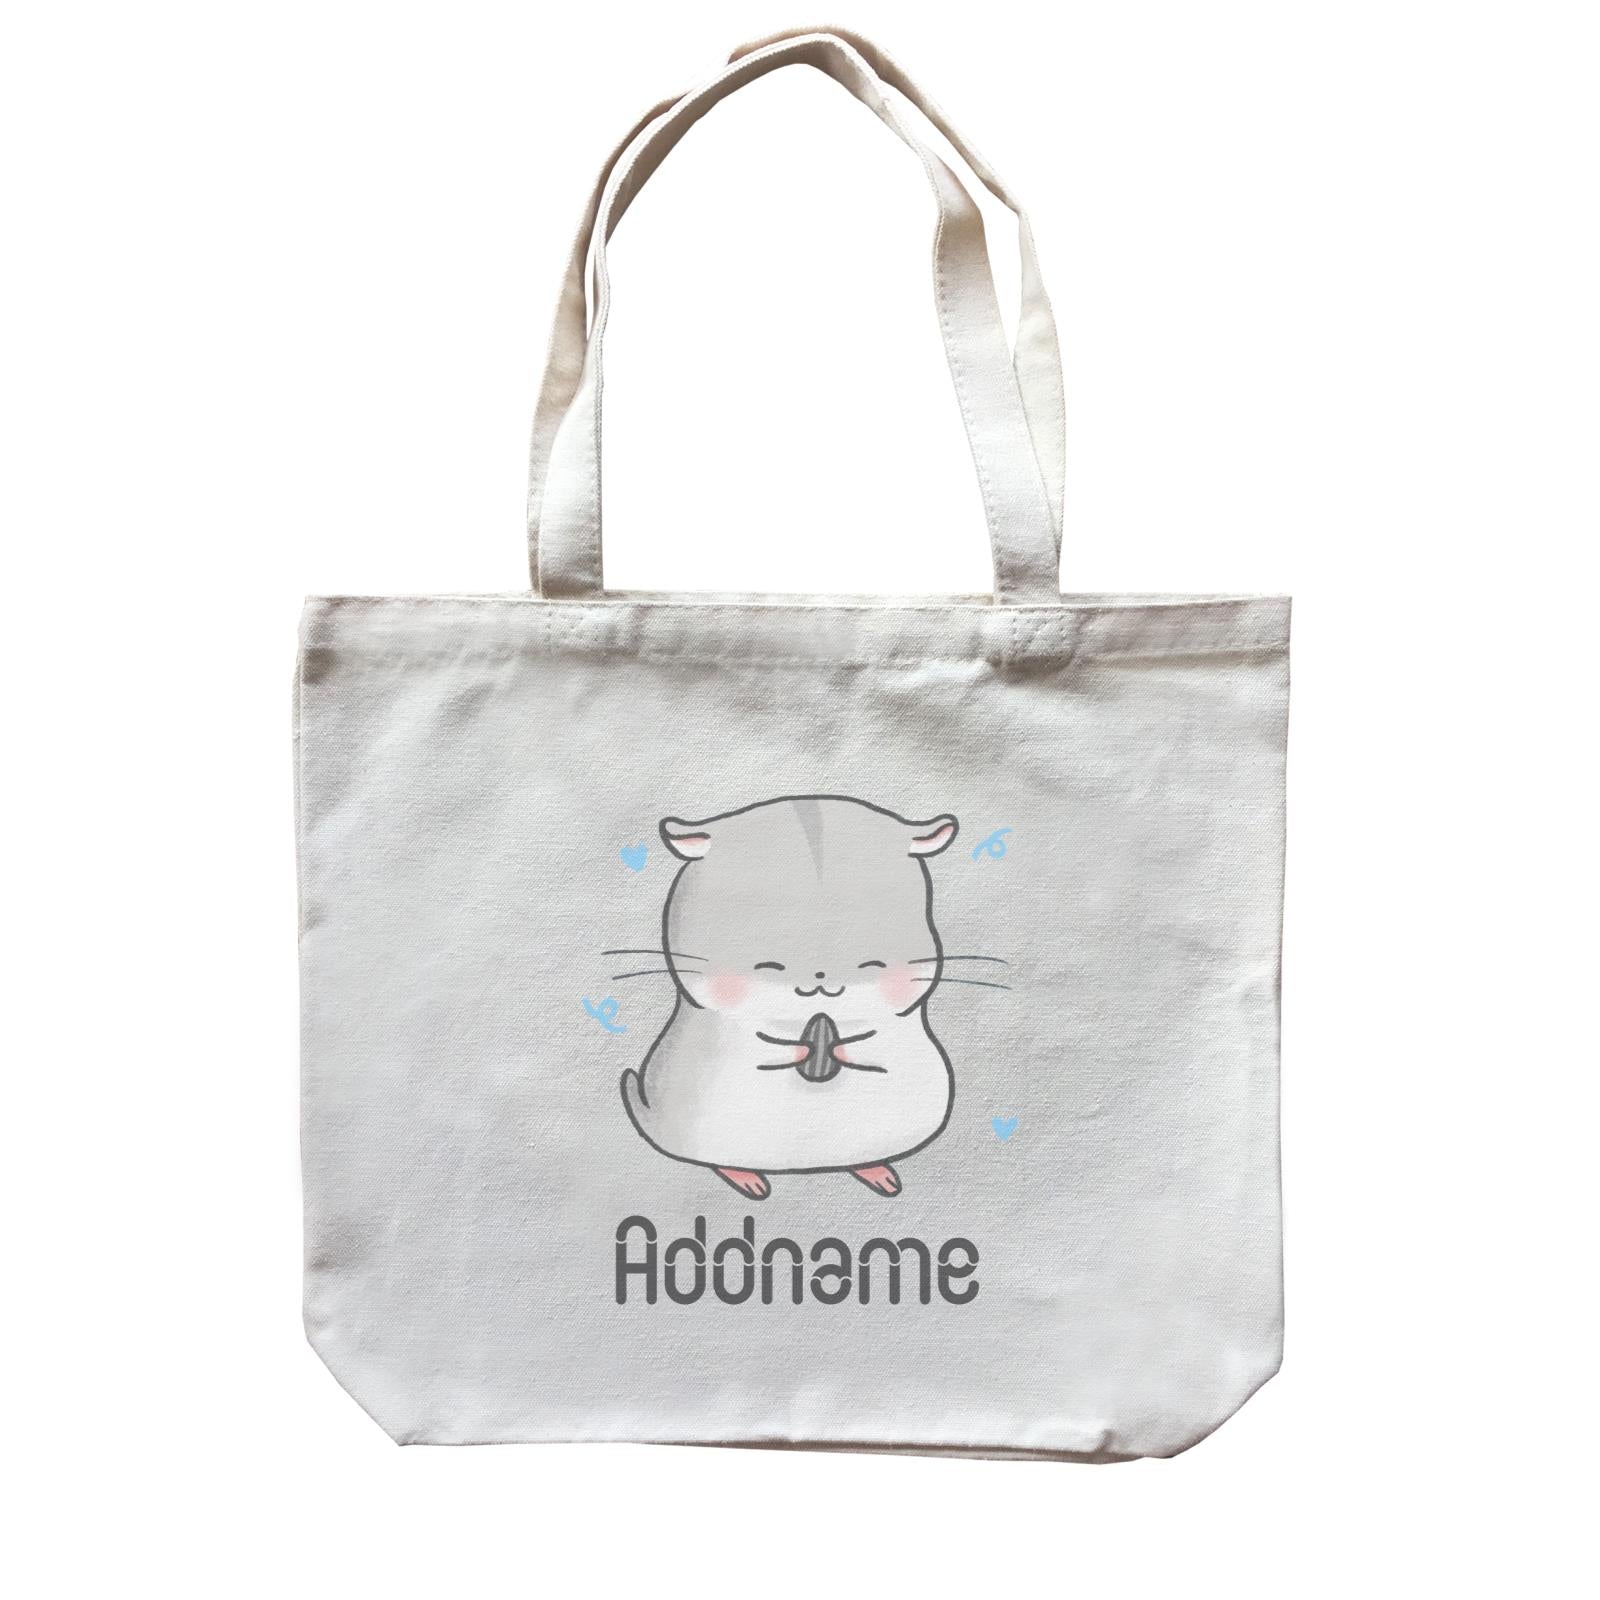 Cute Hand Drawn Style Hamster Addname Canvas Bag